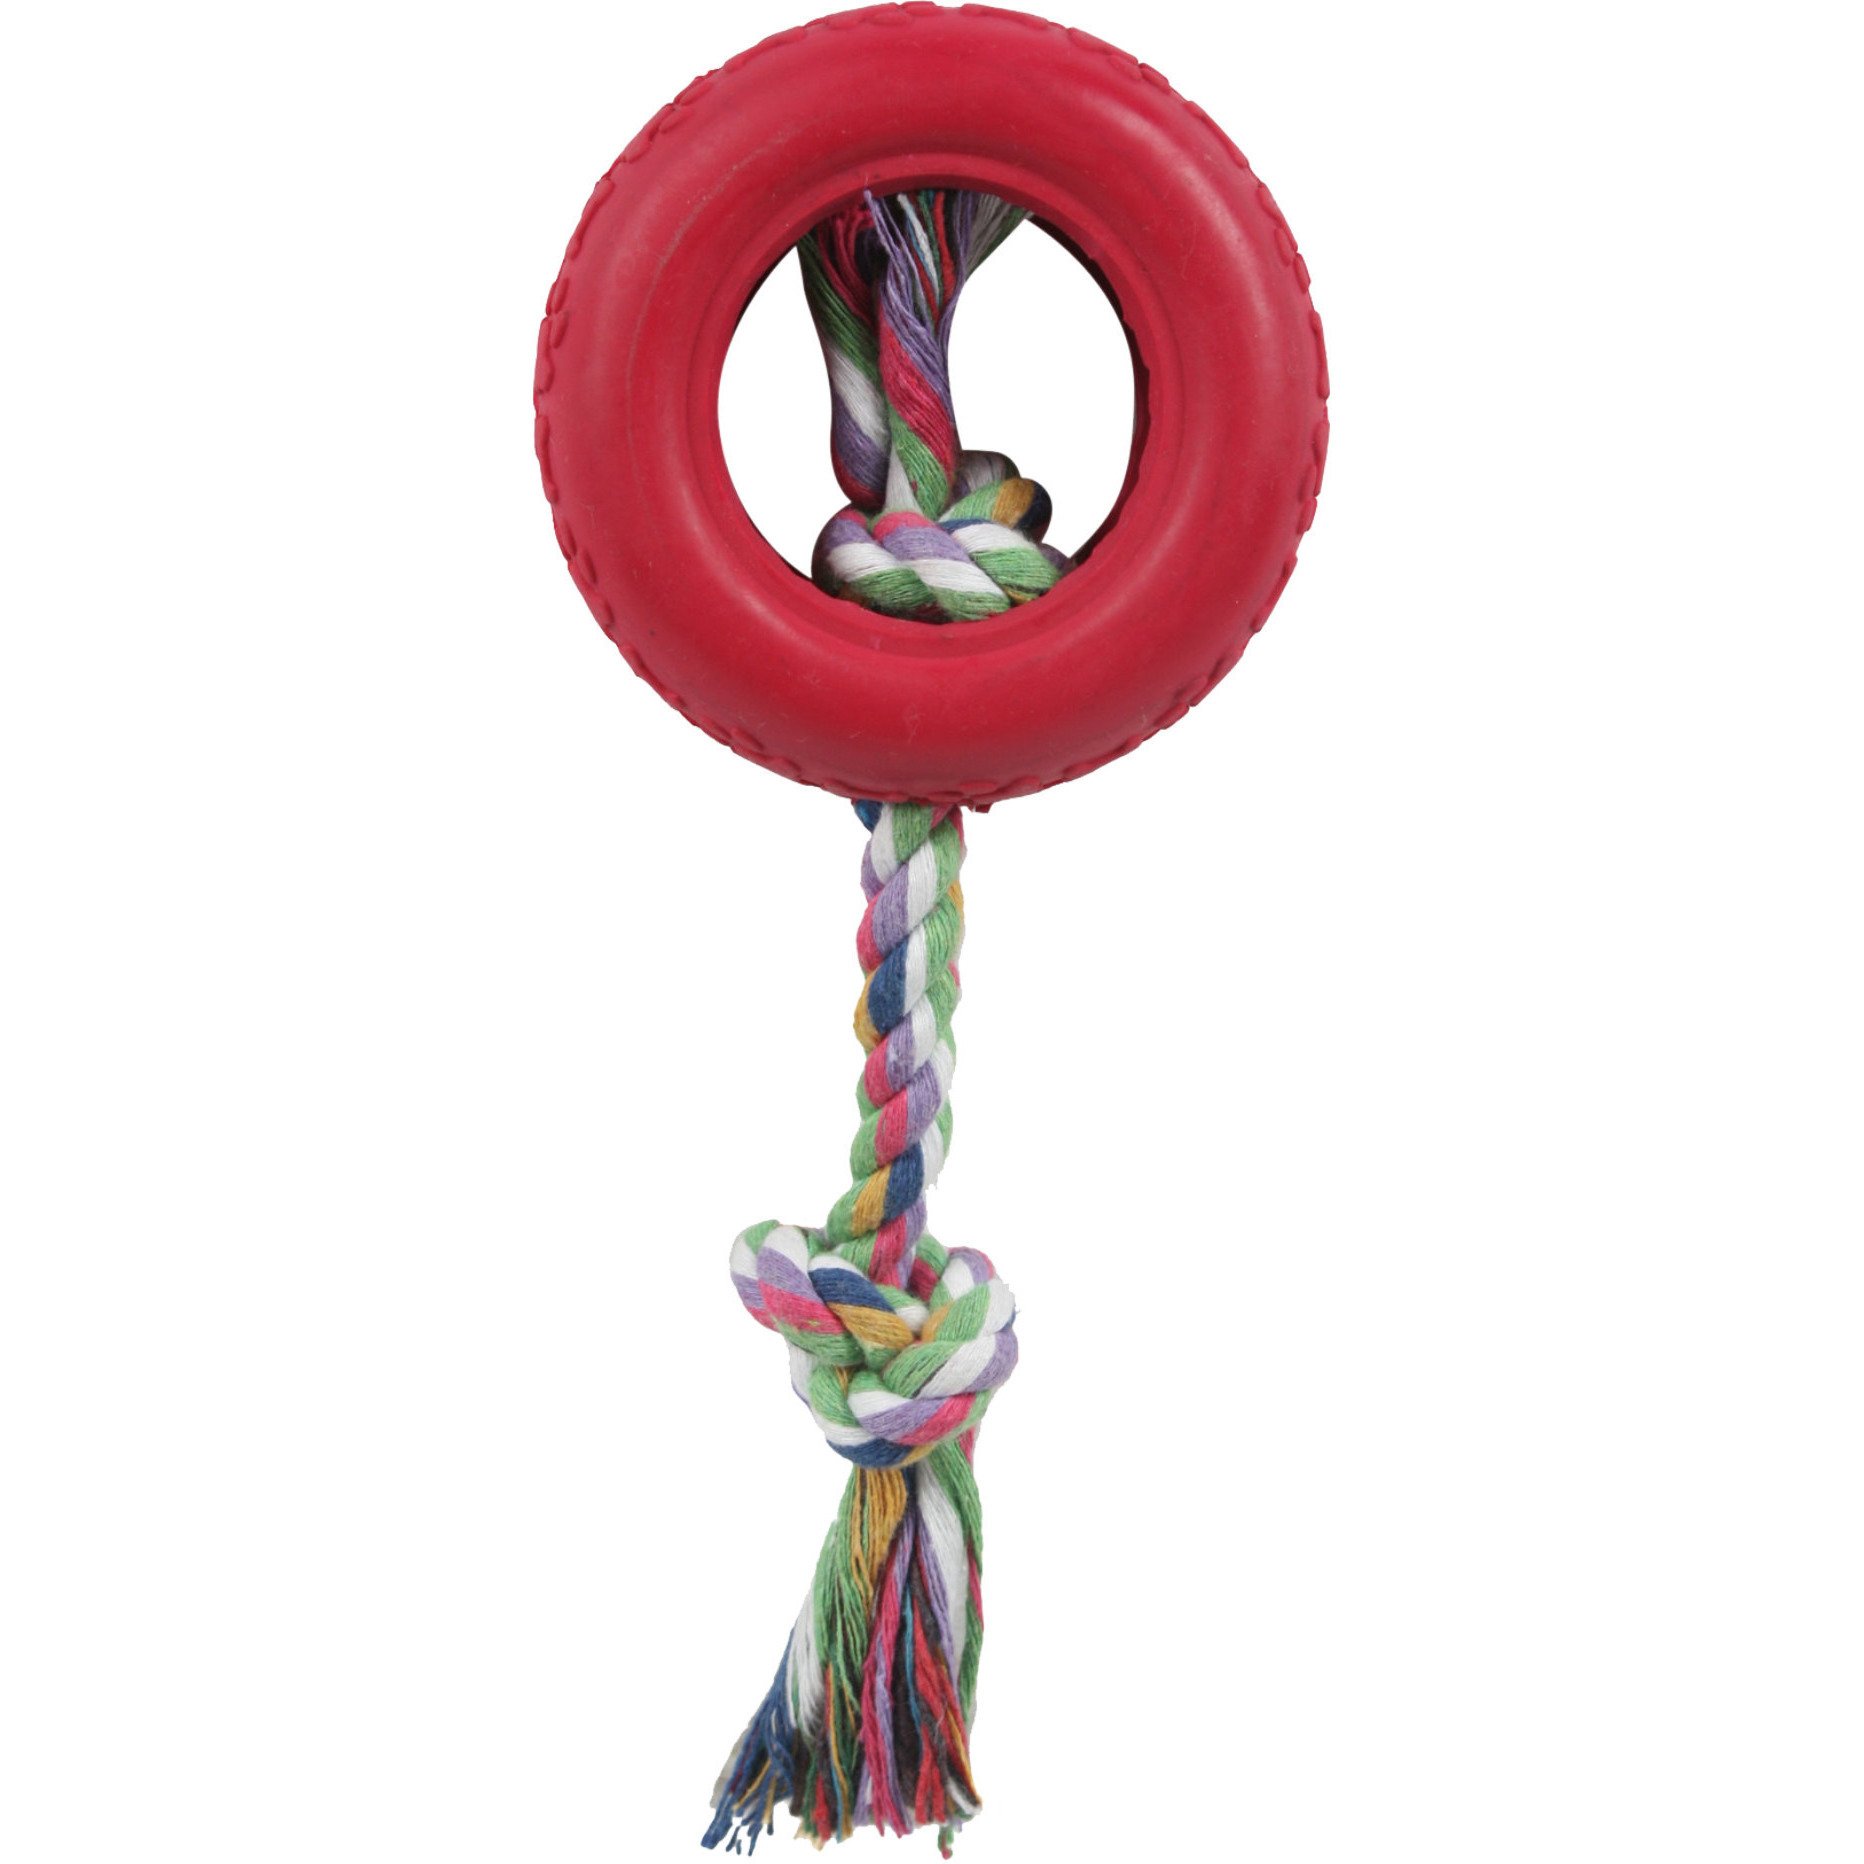 Rubberized Pet Chew Rope And Tire - Red